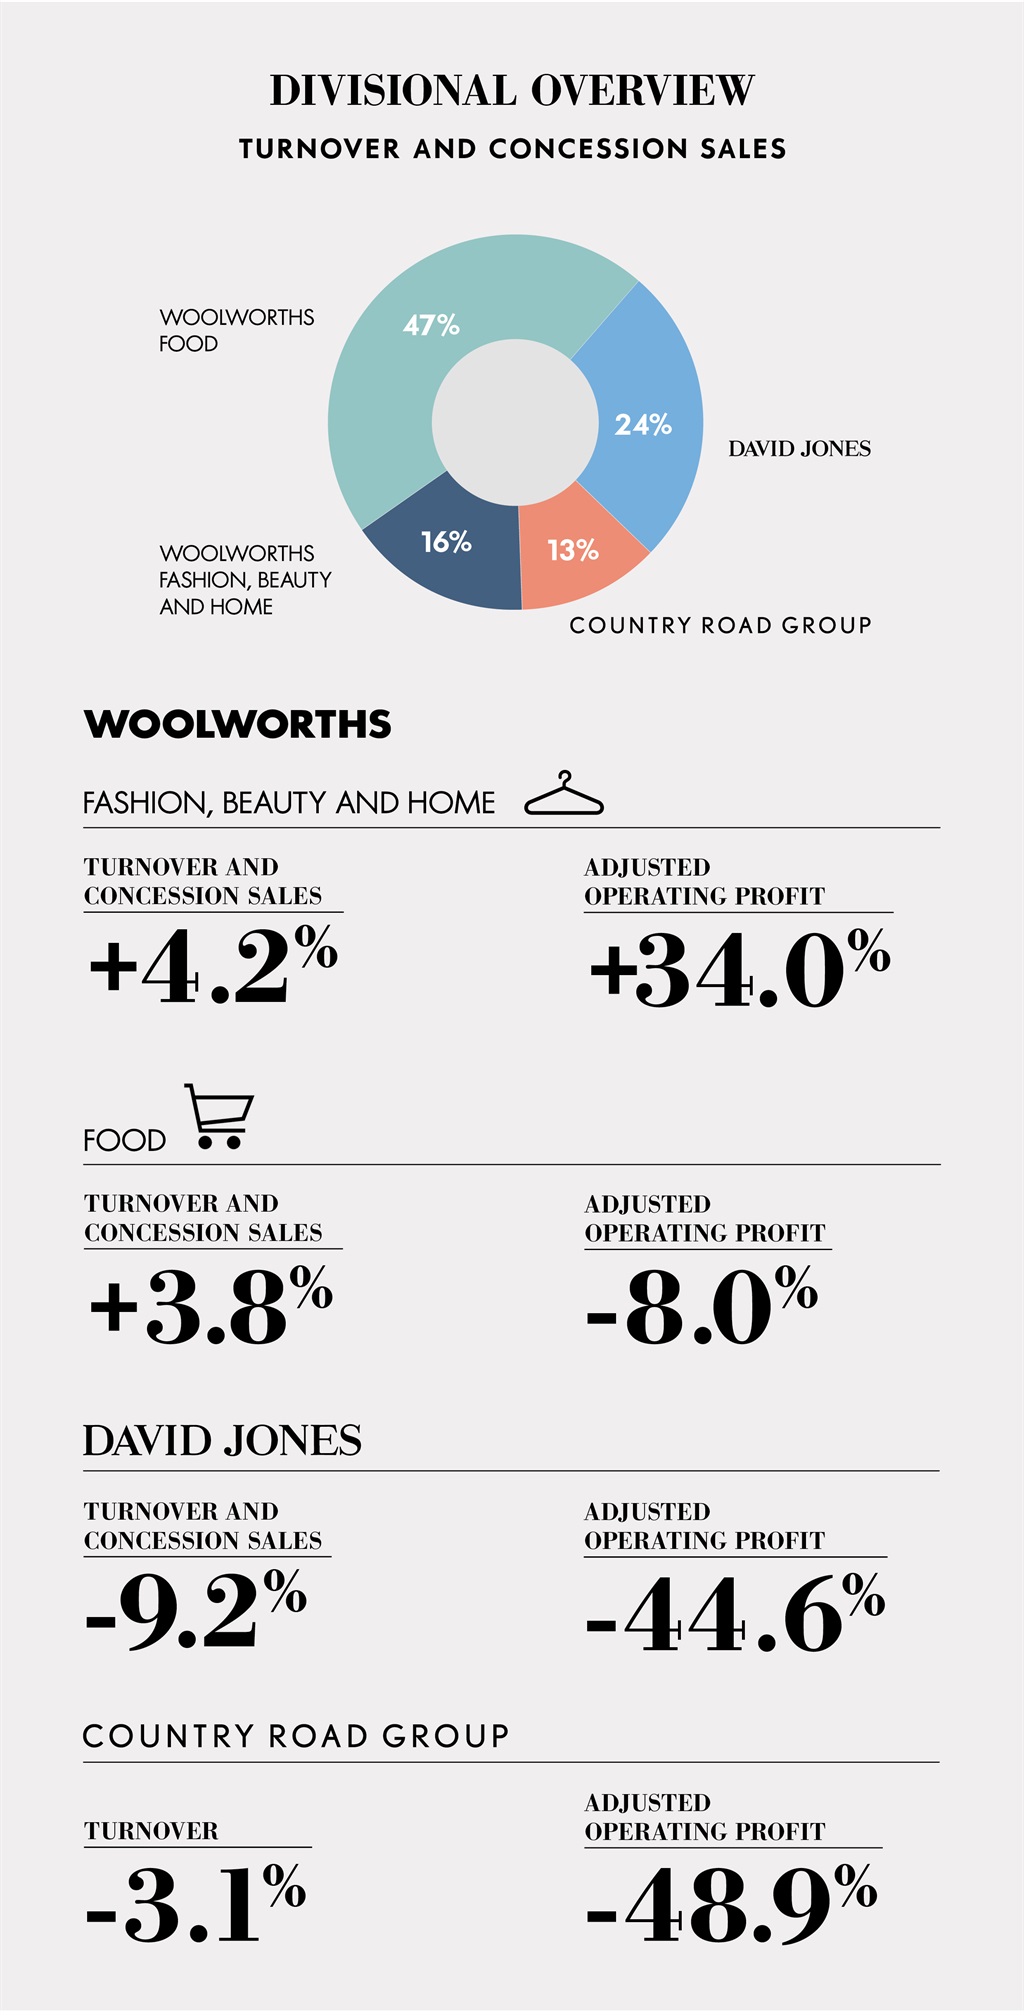 Woolworths releases interim financial results for 